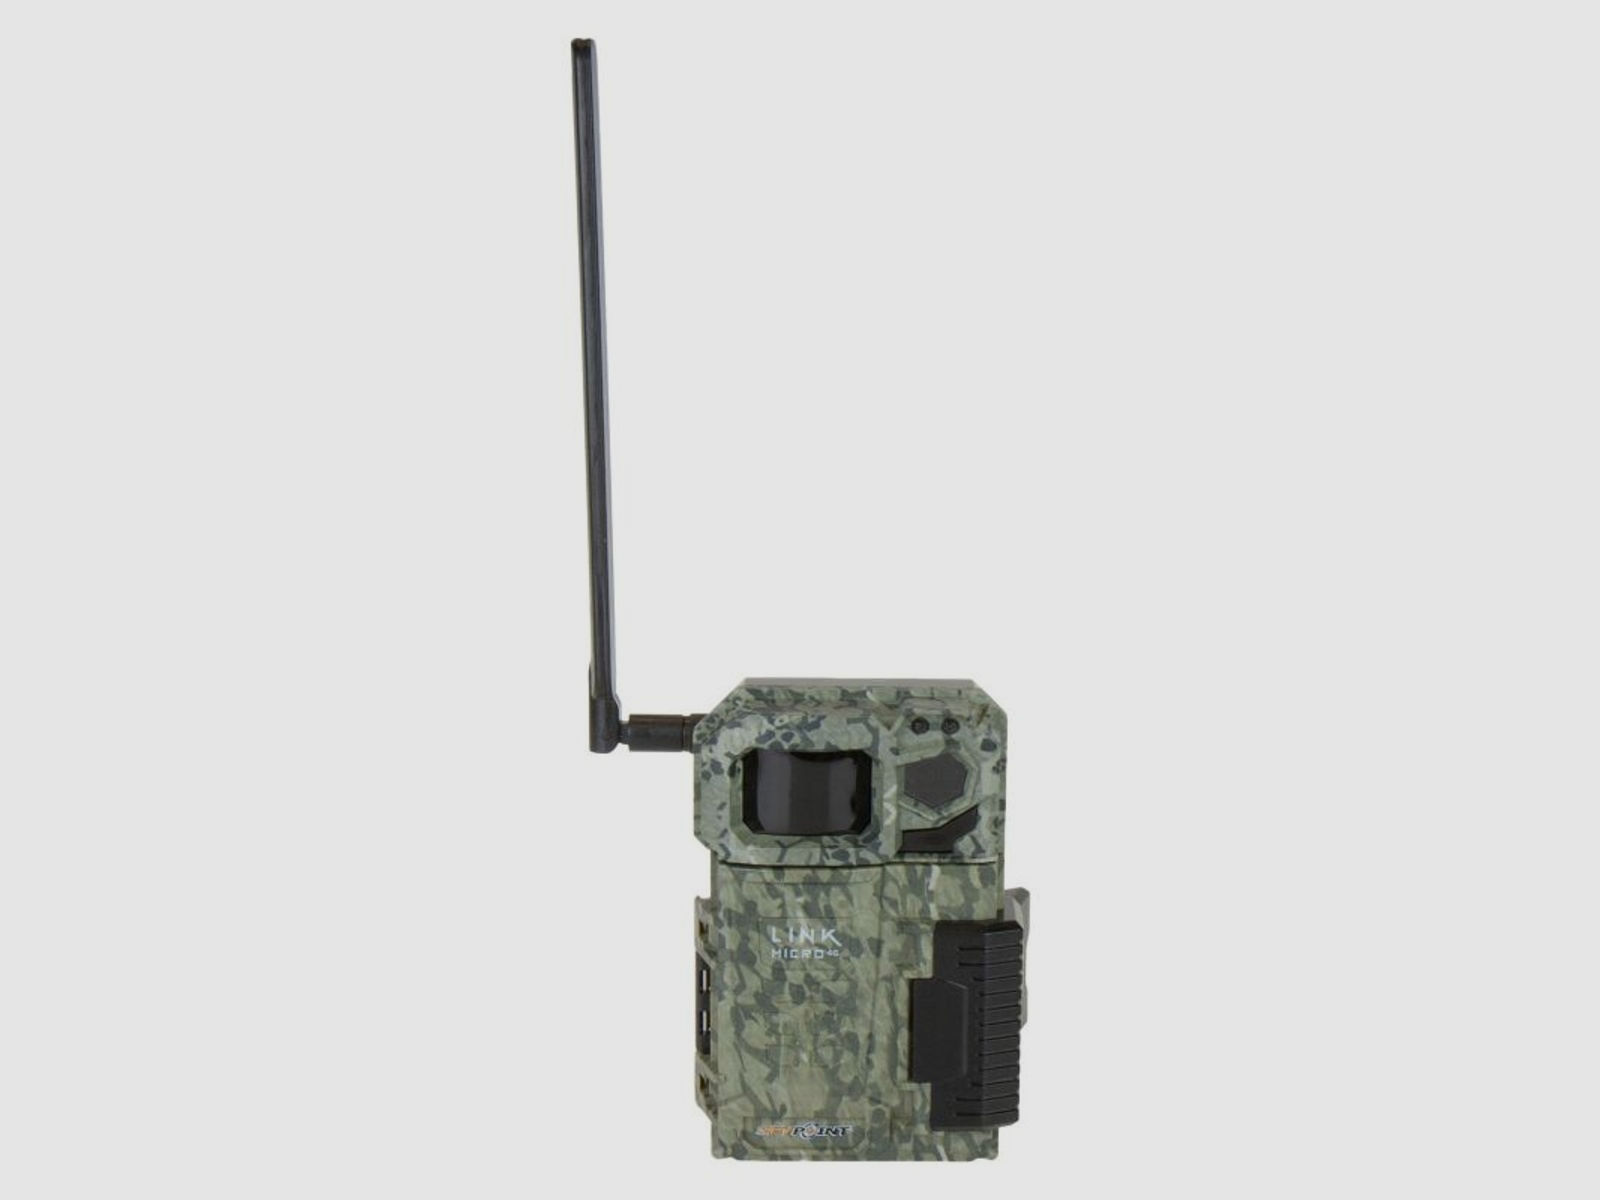 SPYPOINT LINK MICRO LTE